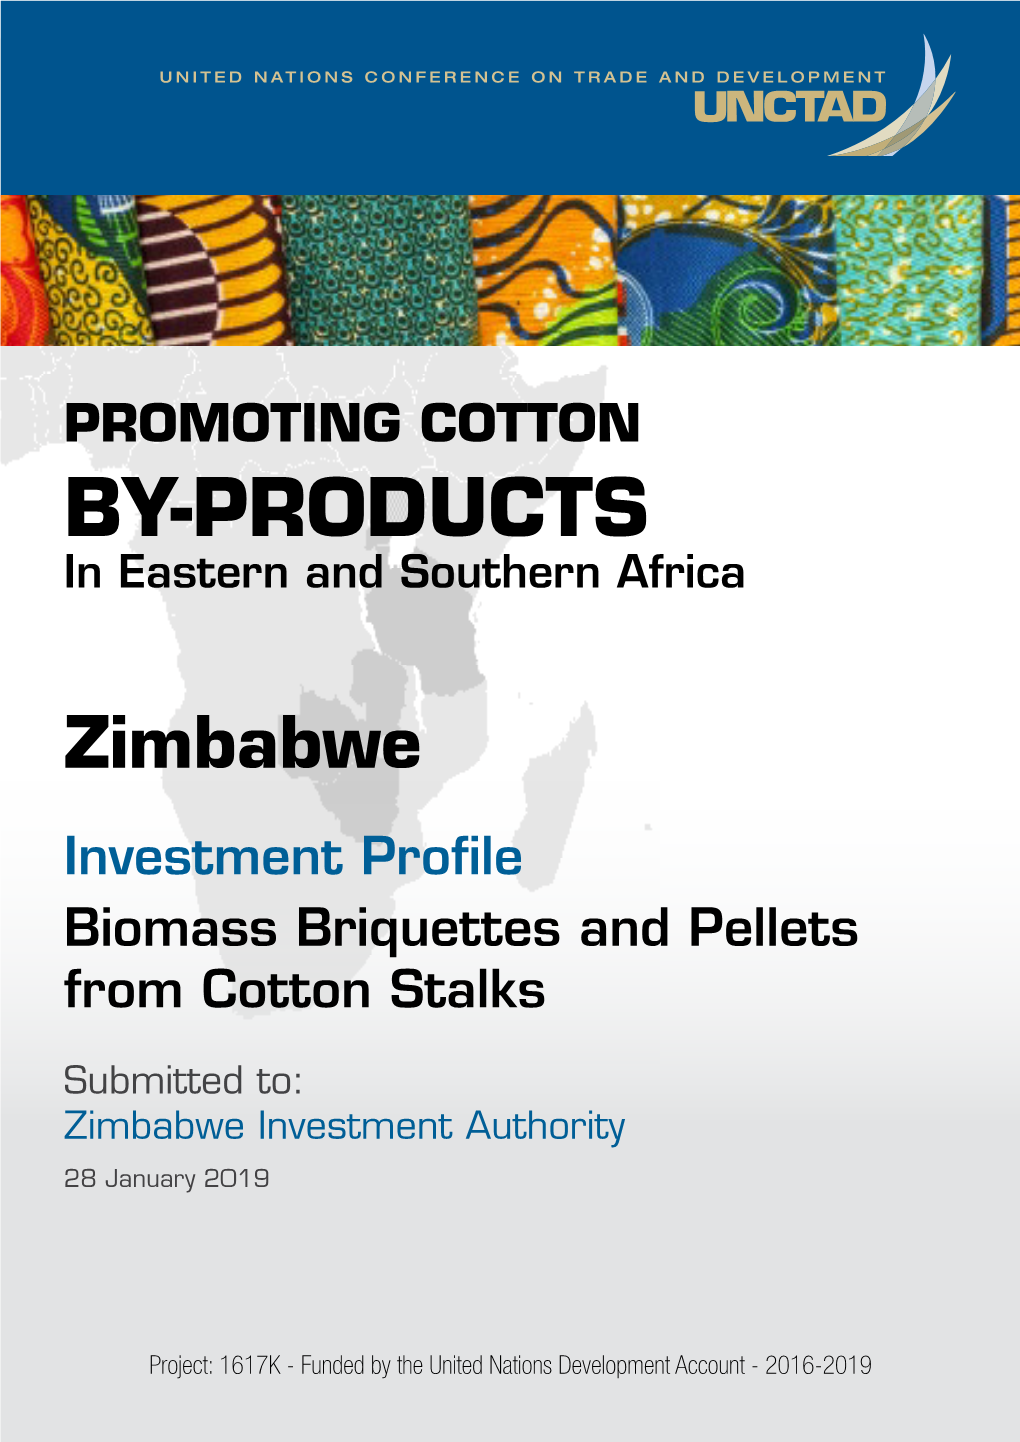 Zimbabwe Investment Profile for Biomass Pellets and Briquettes